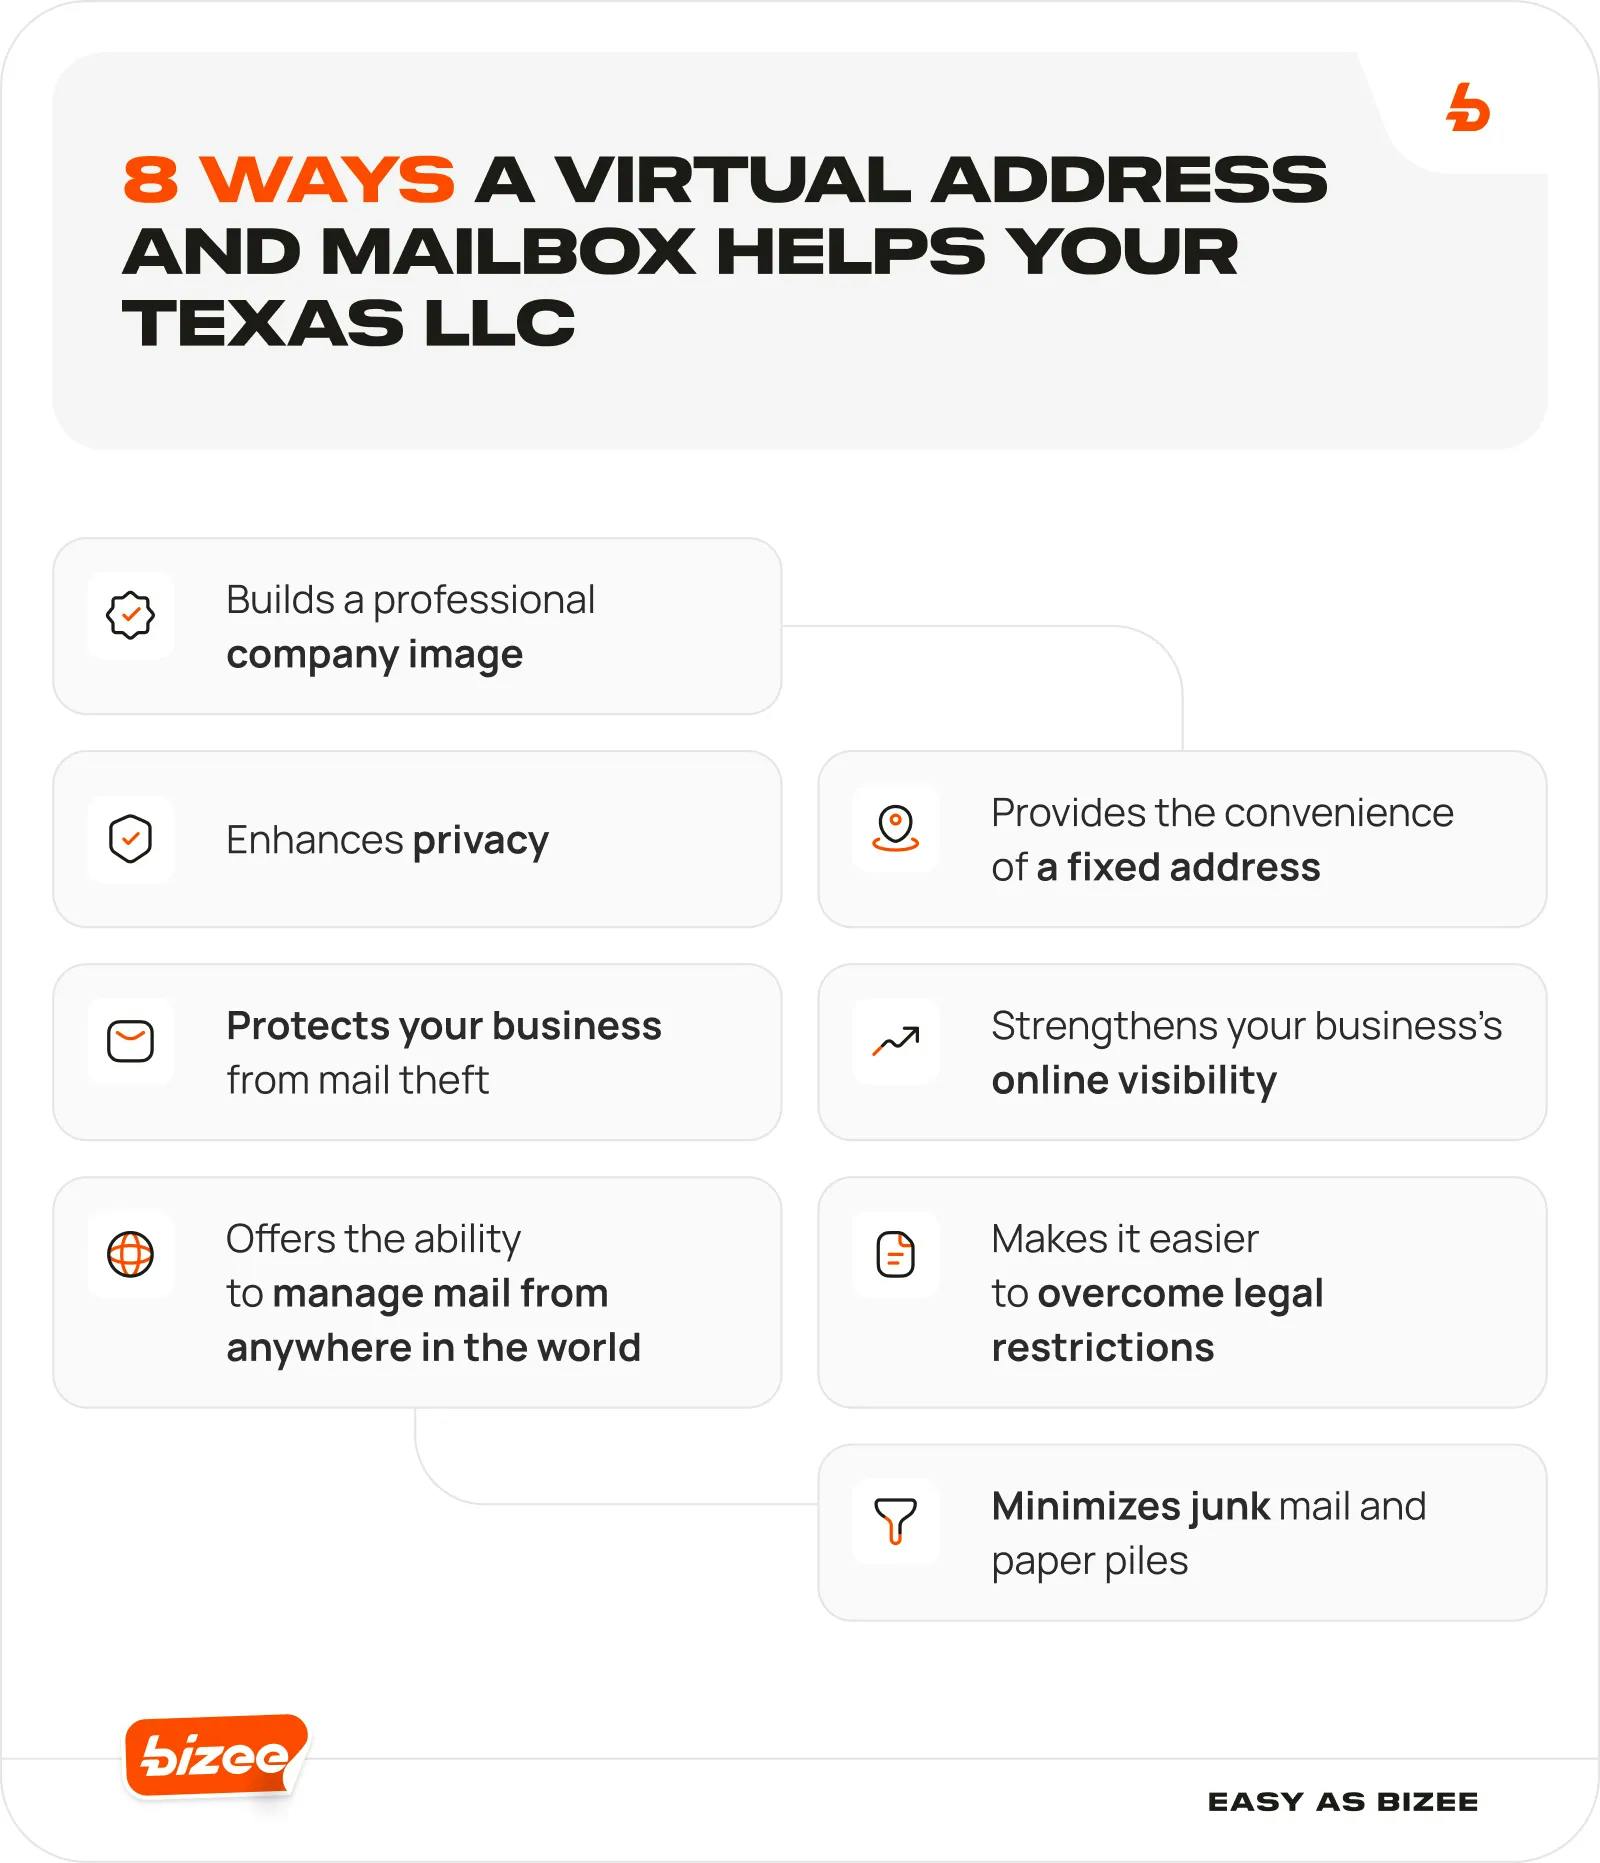 8 Ways a Virtual Address and Mailbox Helps Your Texas LLC